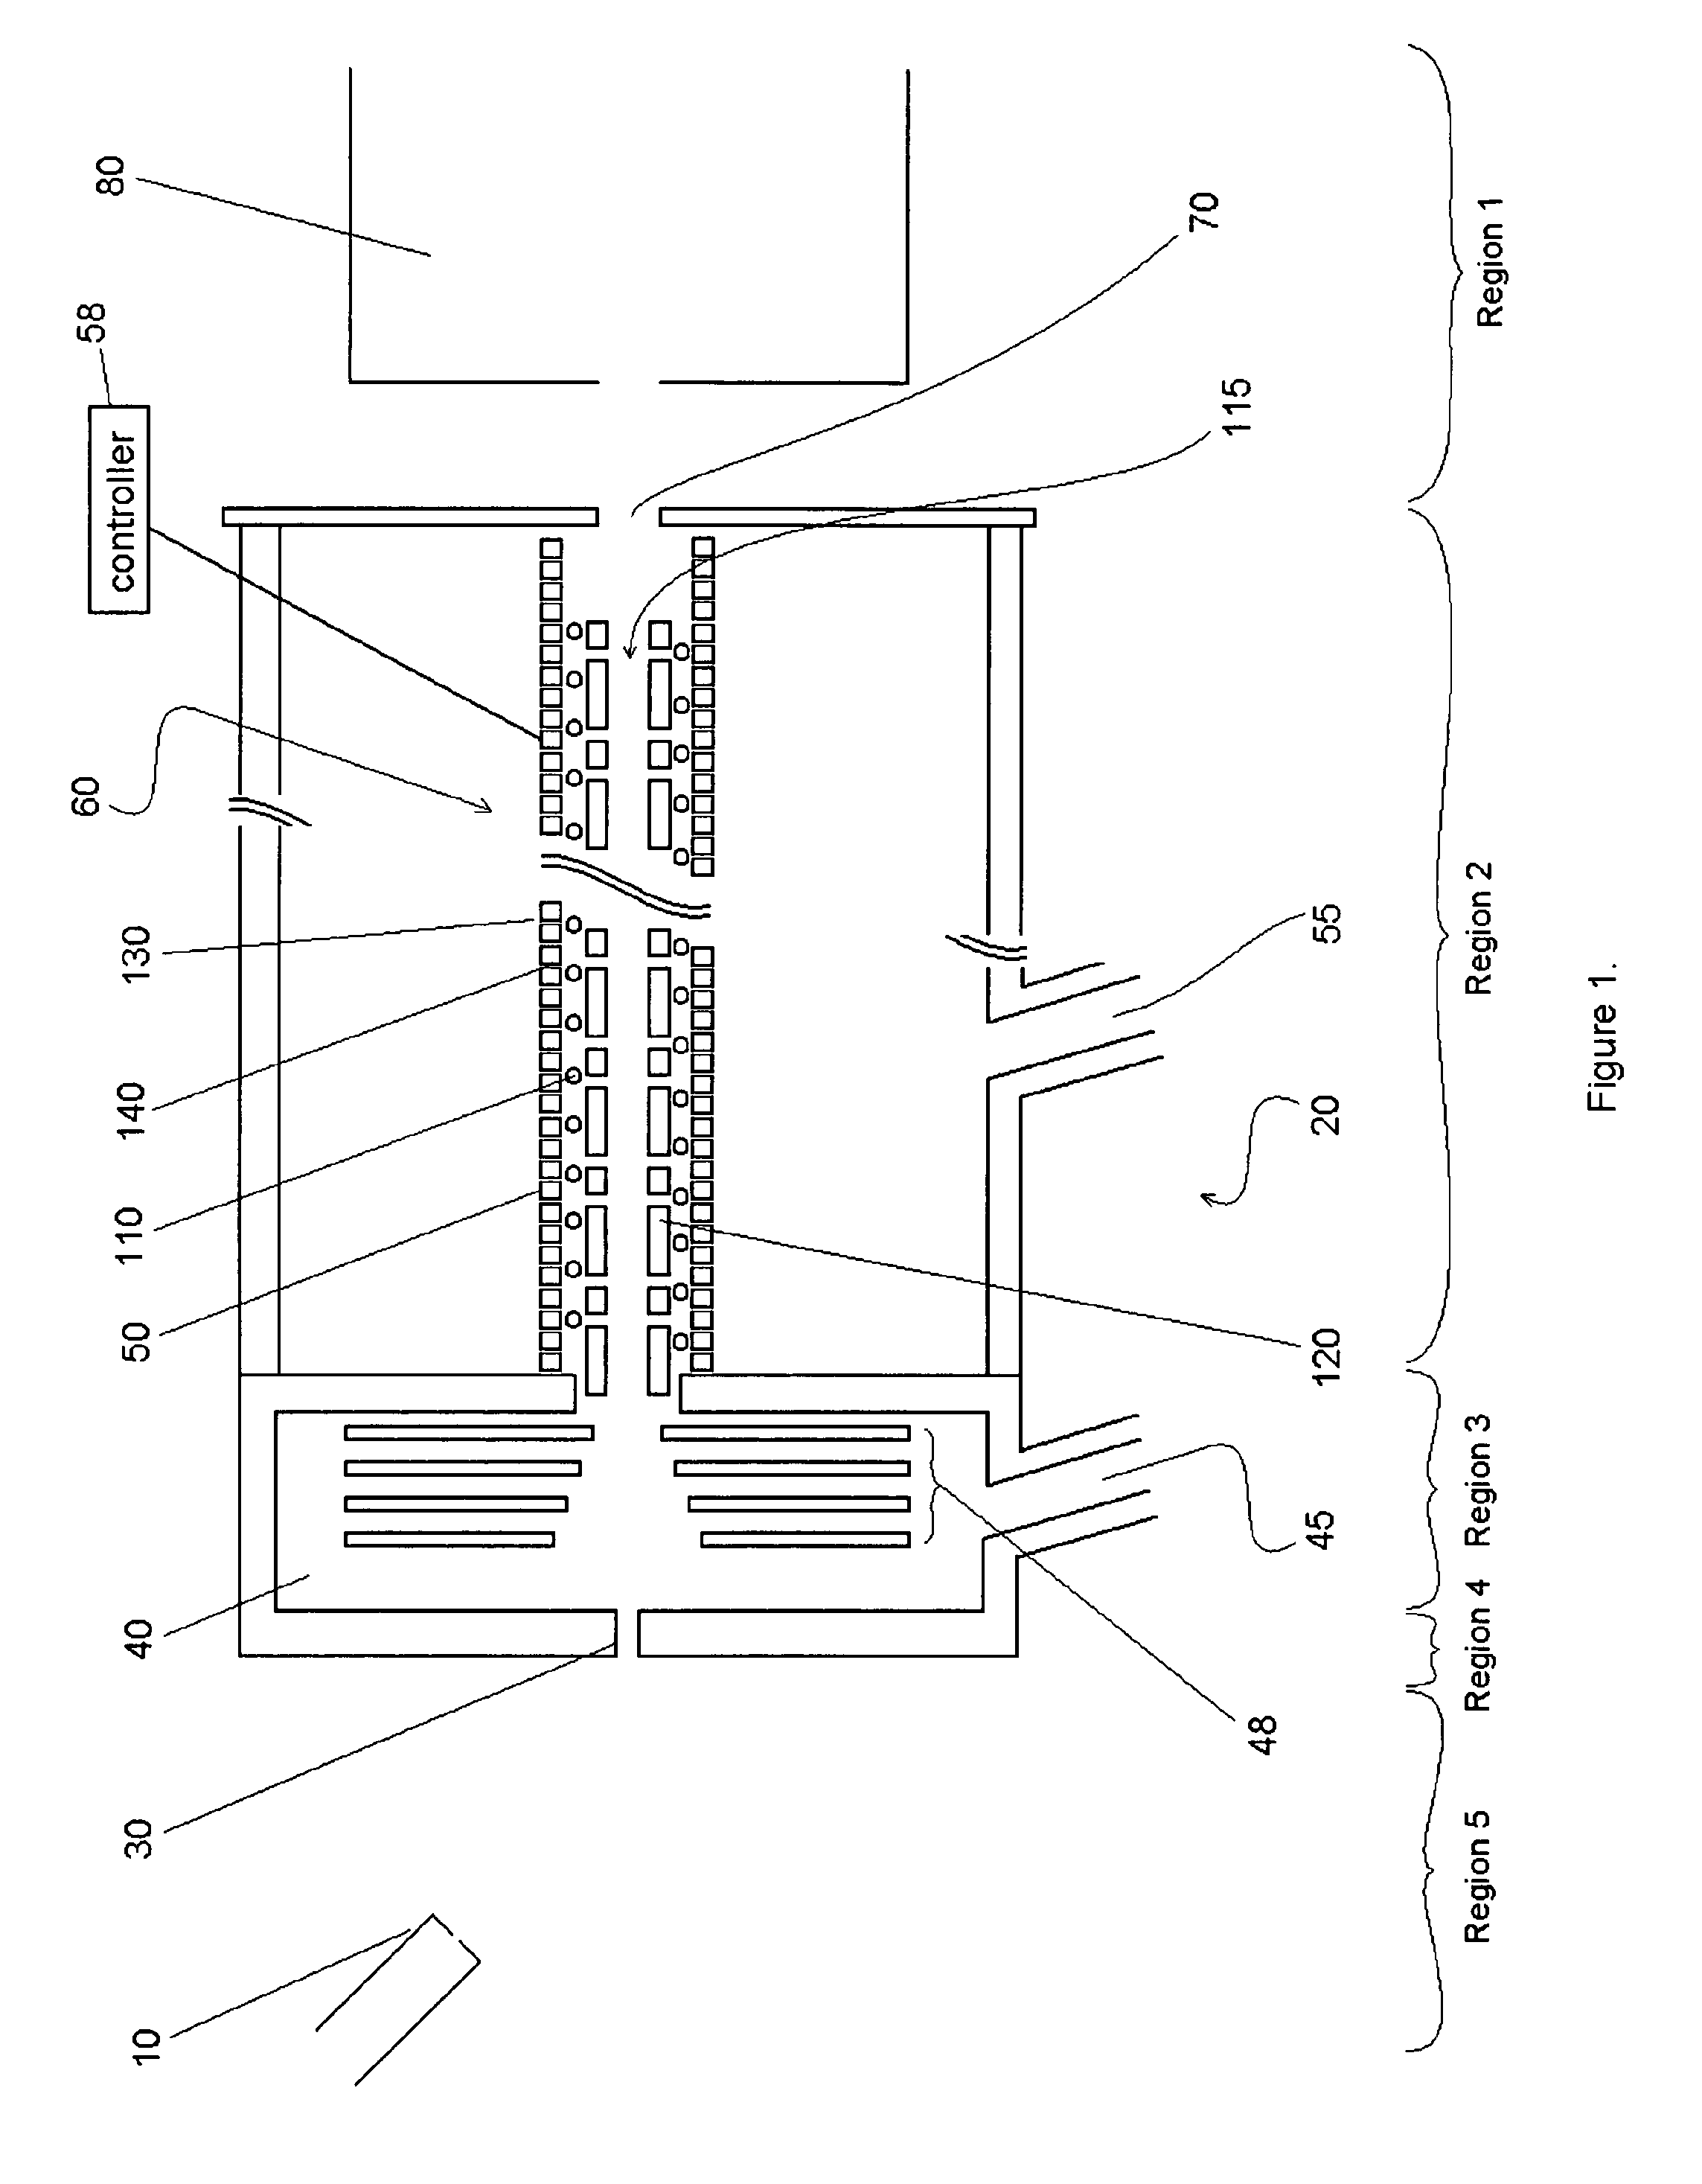 Ion transfer tube with spatially alternating DC fields